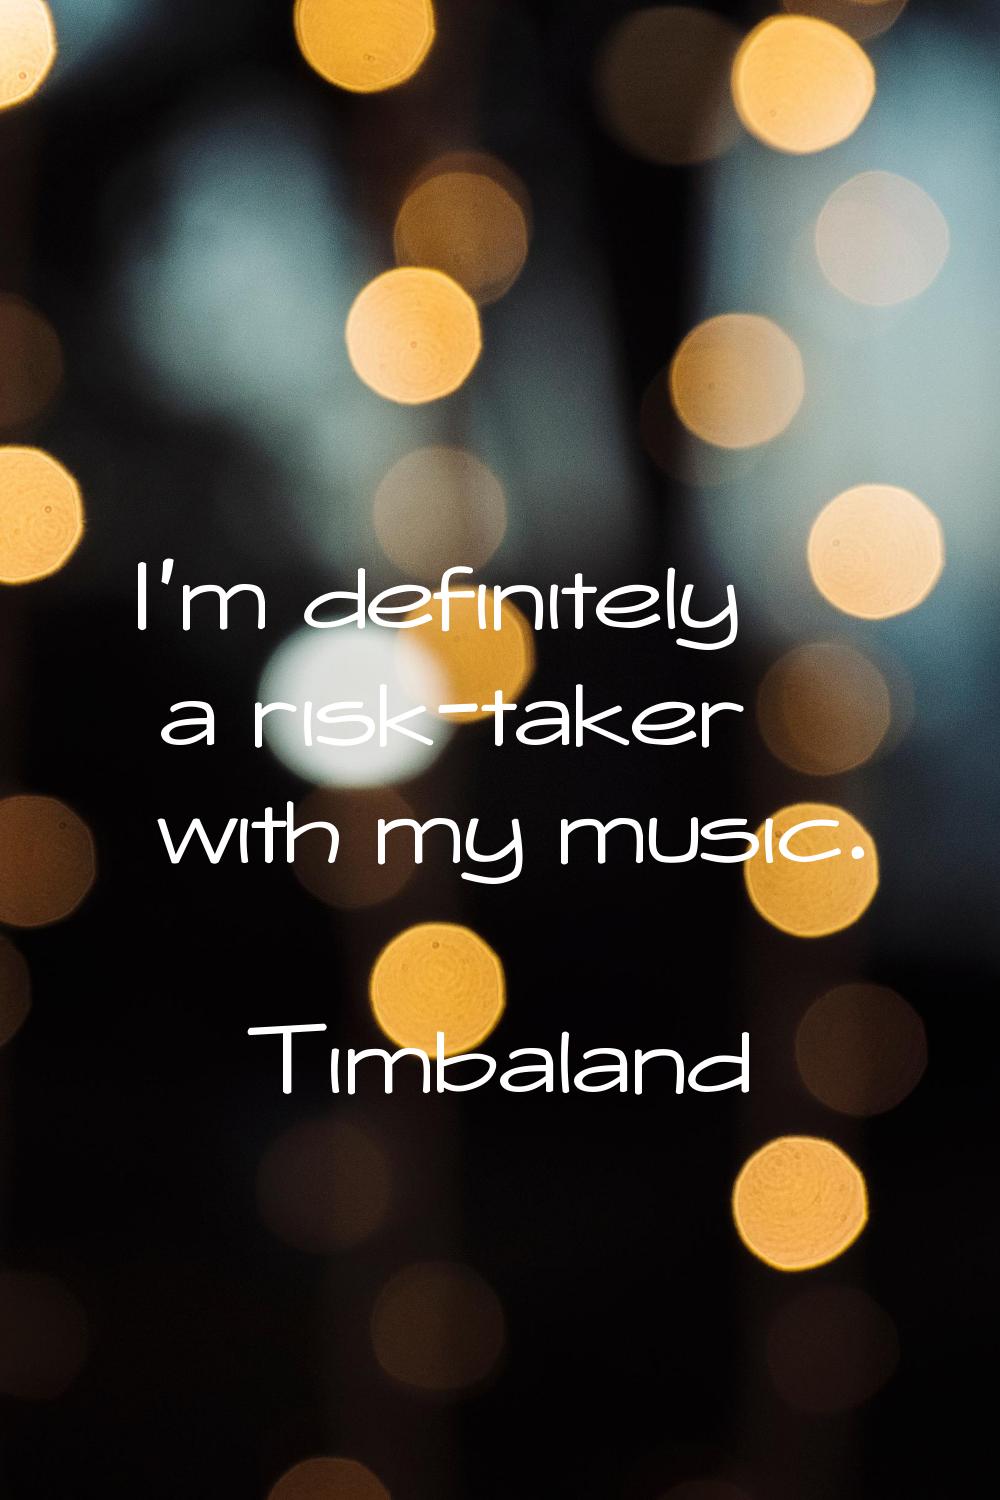 I'm definitely a risk-taker with my music.